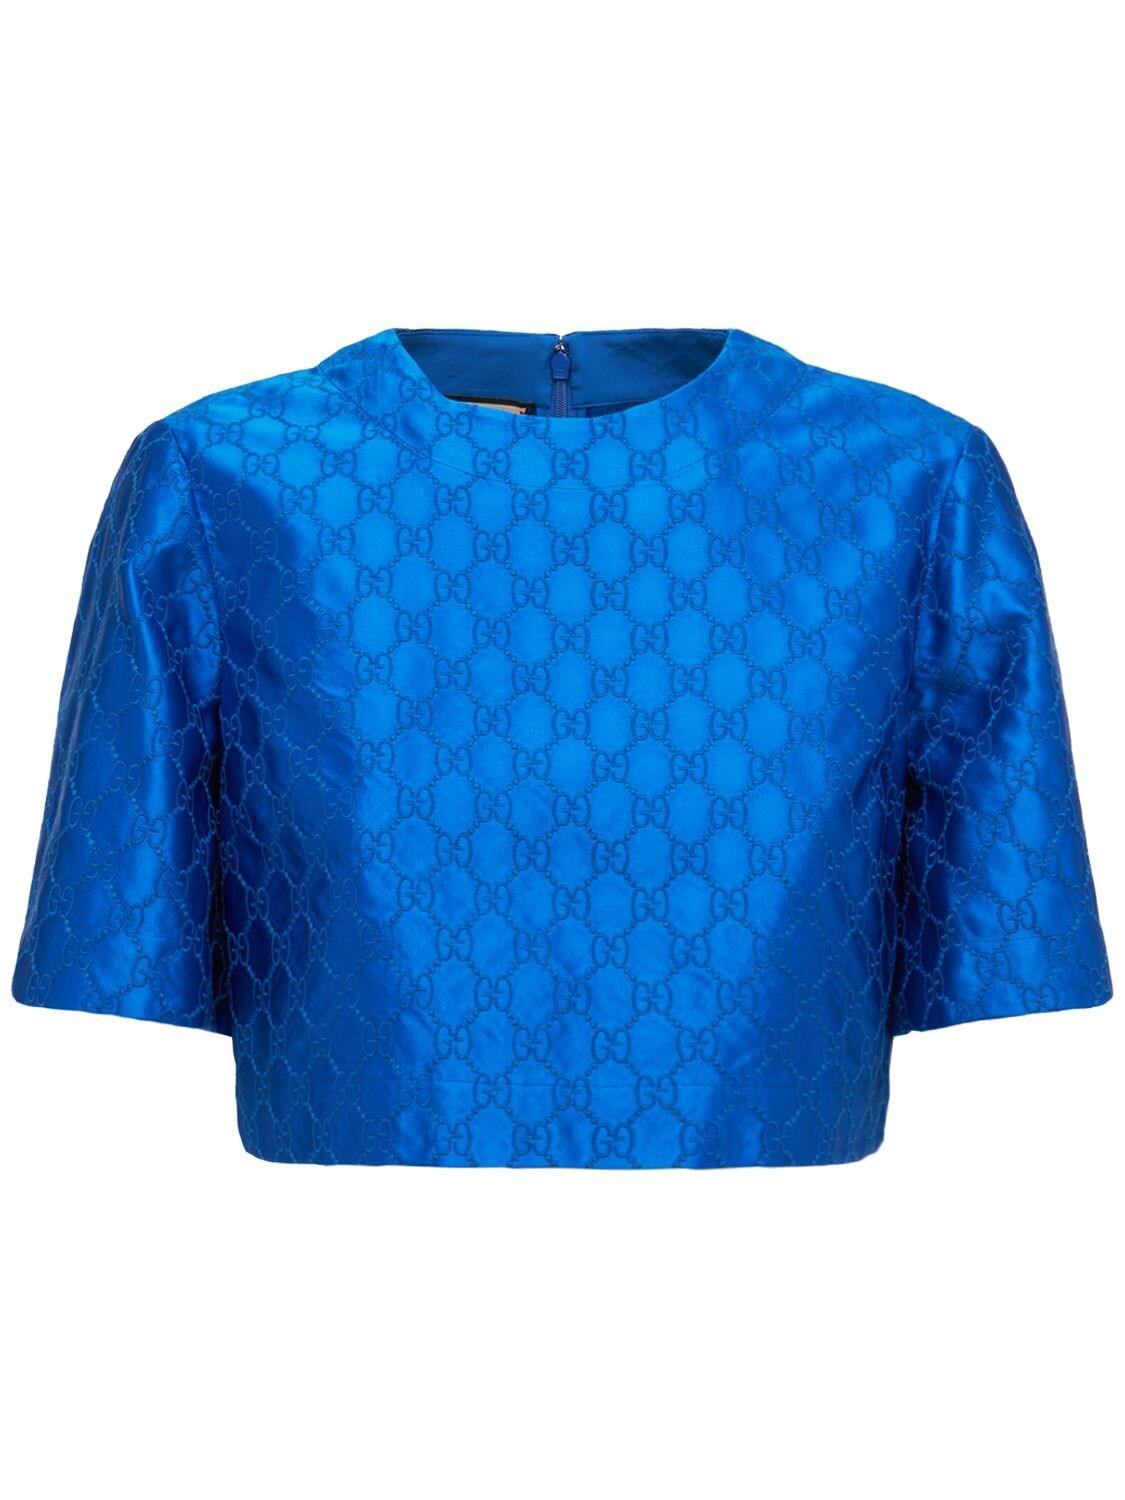 Gucci Embroidered Silk Logo Cropped Top in Blue | Lyst